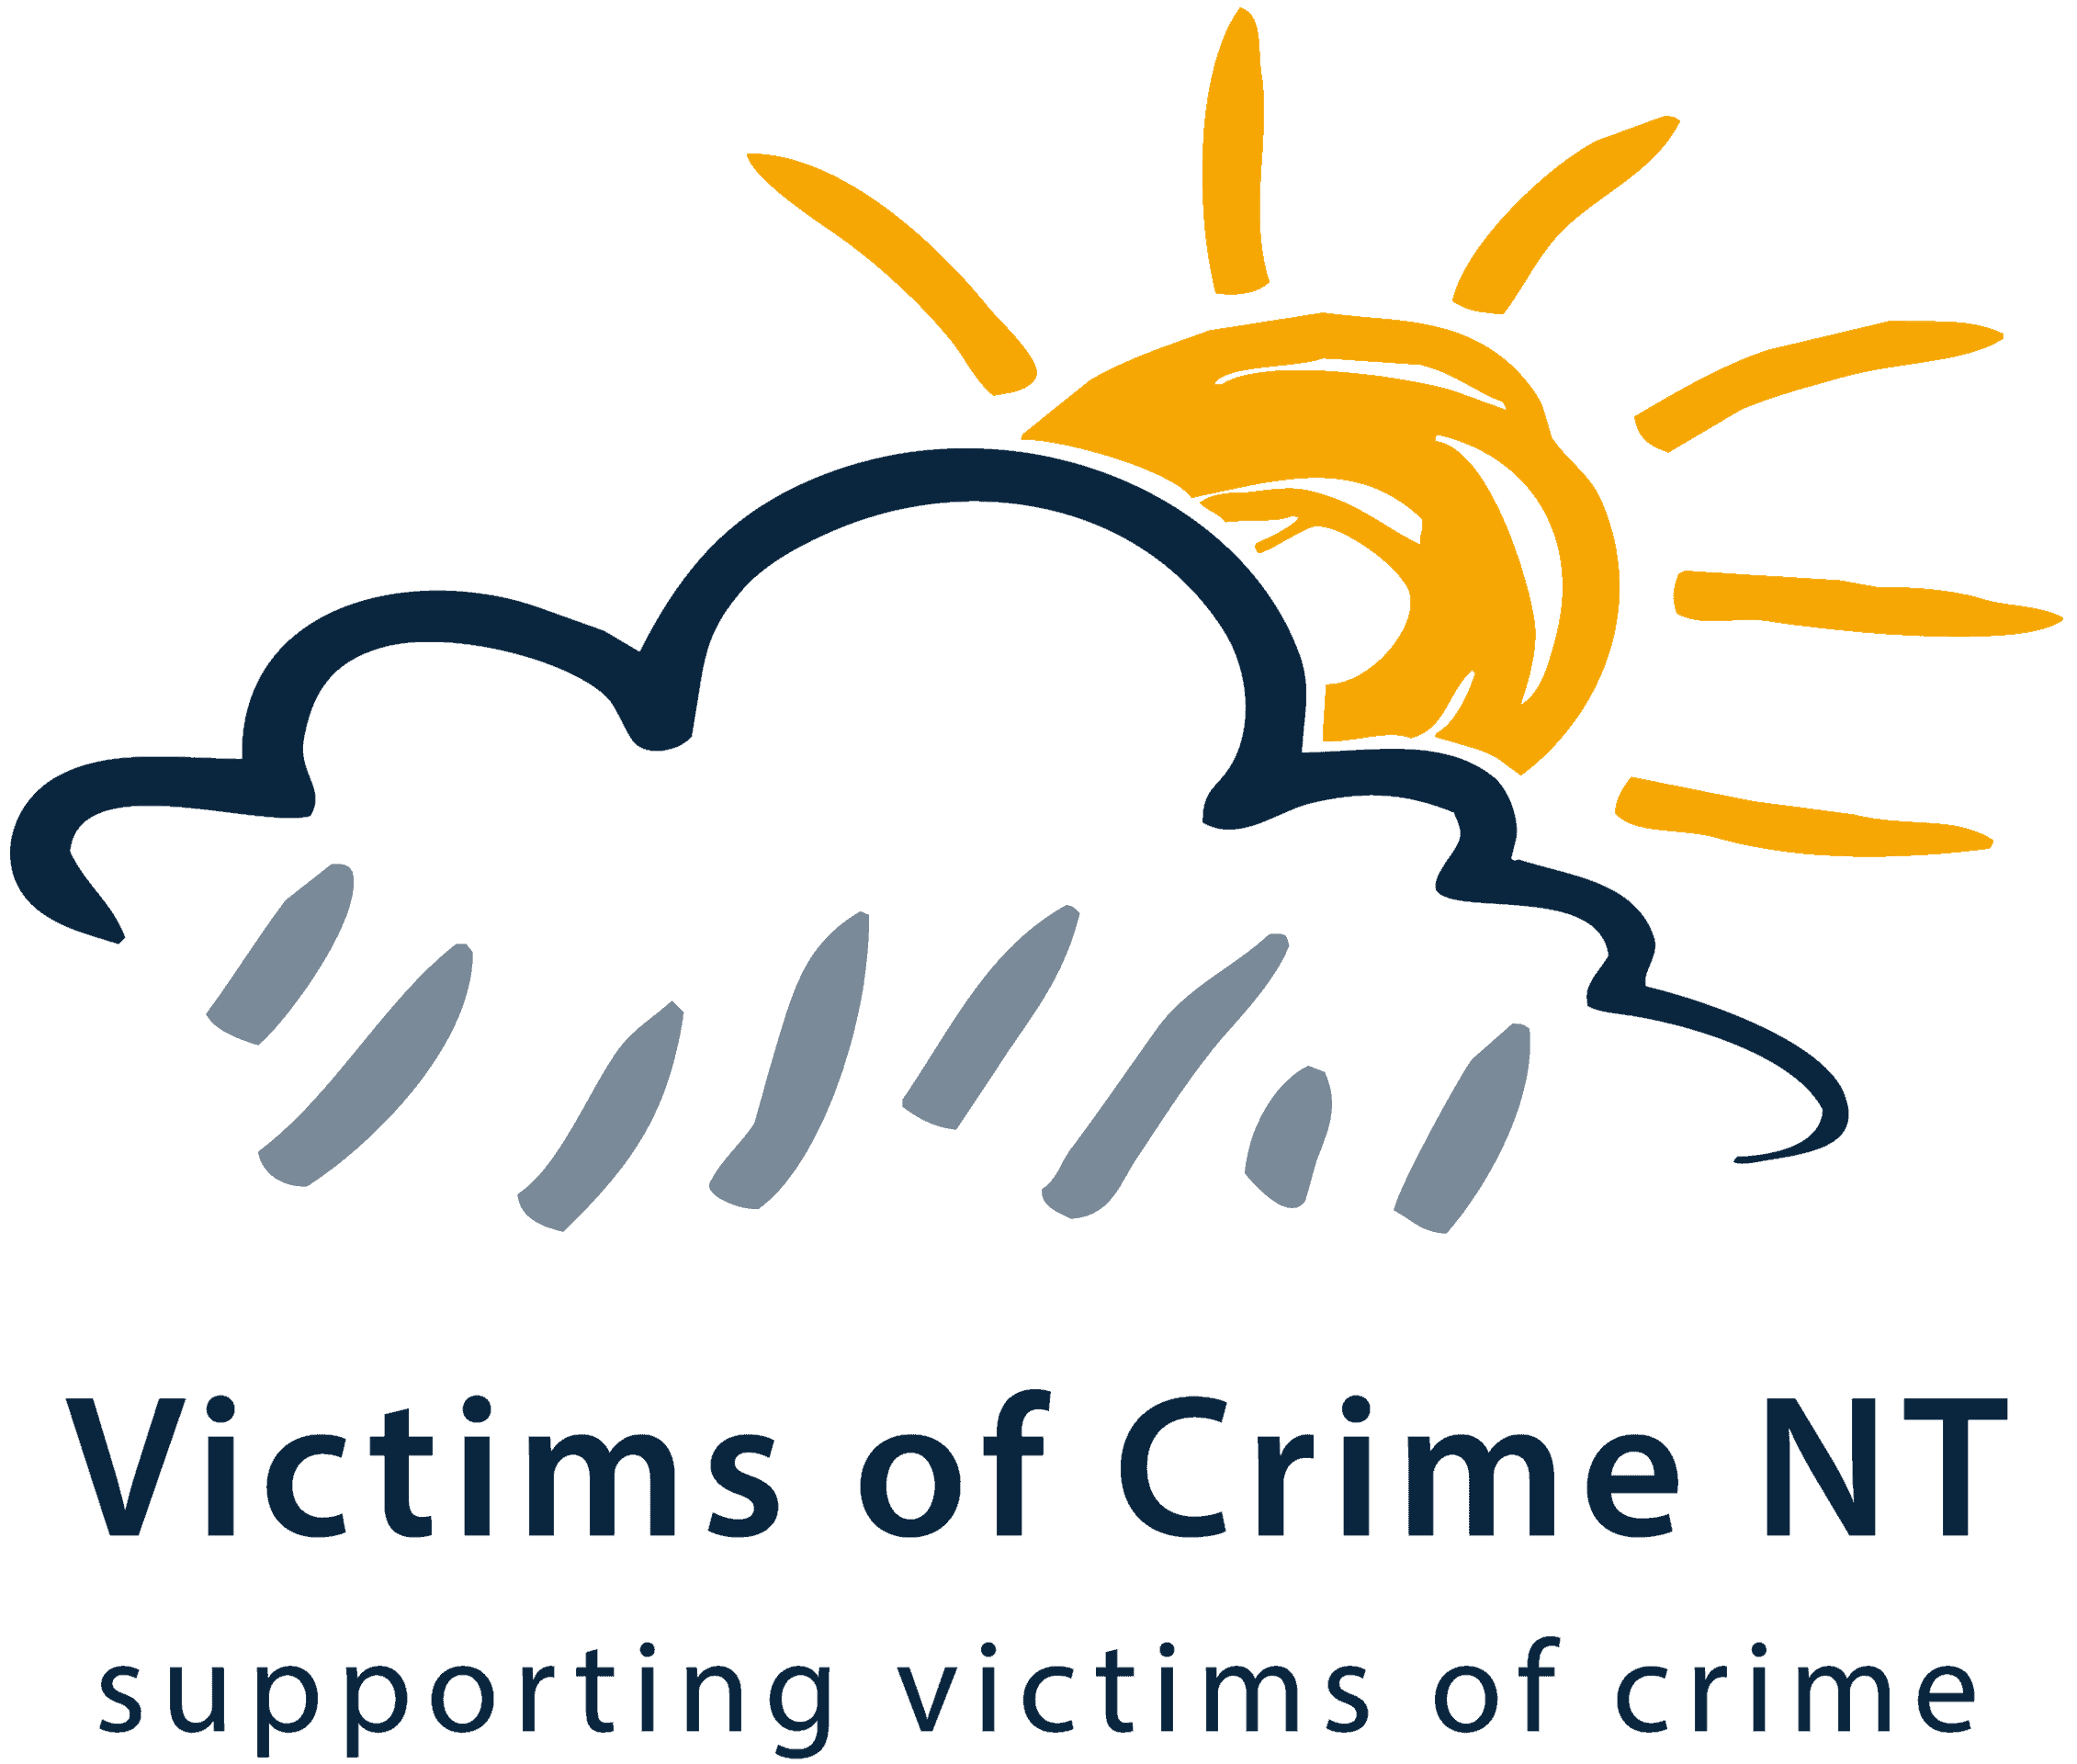 Victims of Crime NT